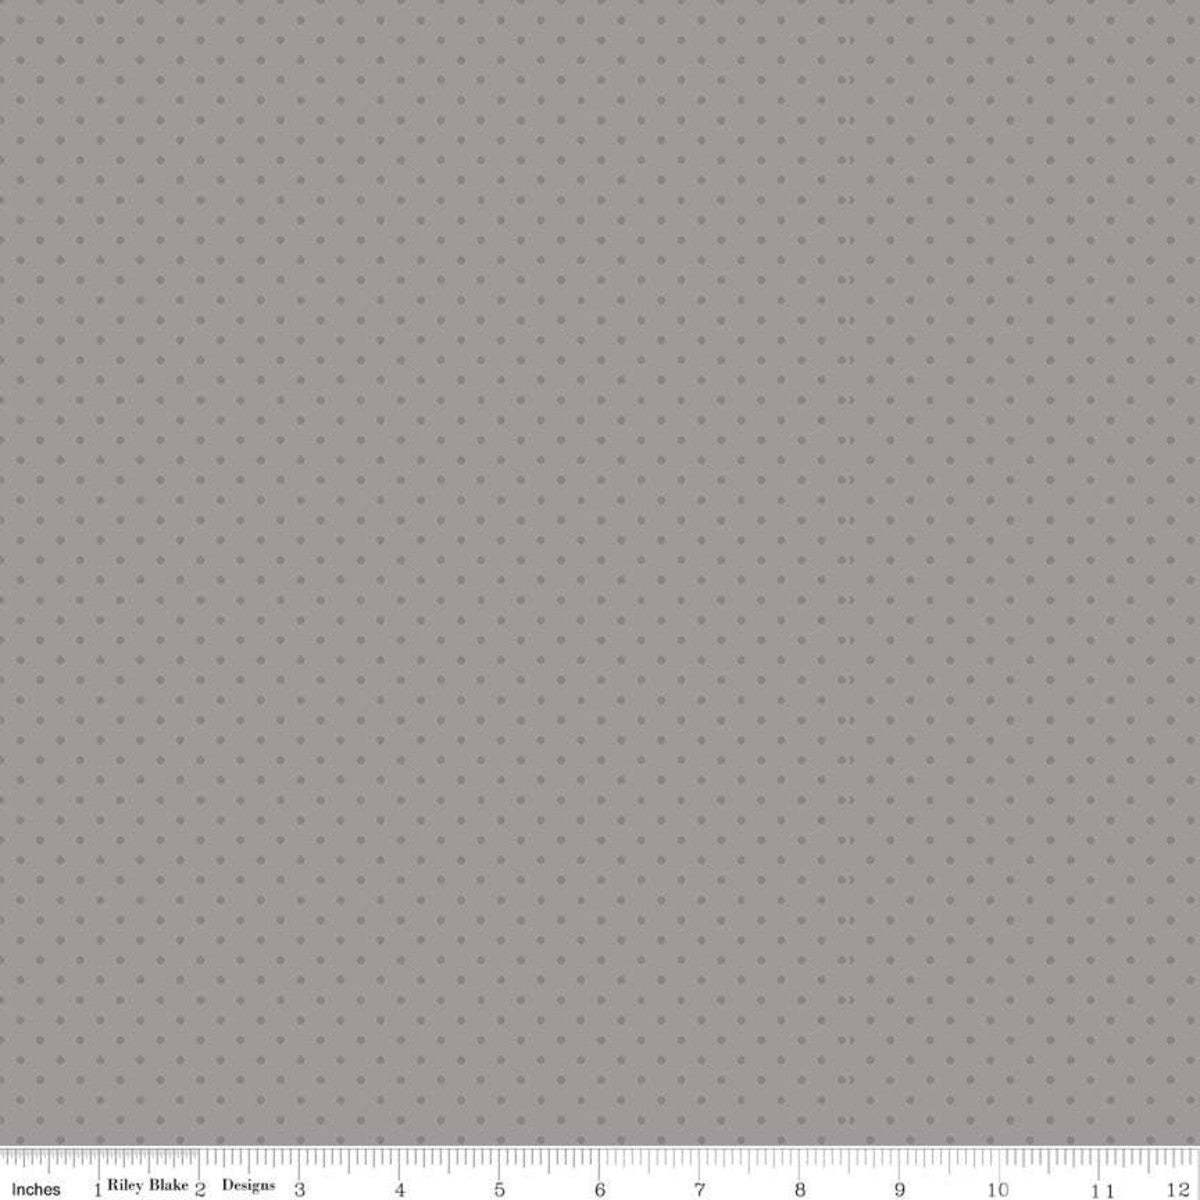 Gray Swiss Polka Dots - Gray Background Fabric, 100% Cotton, Ref. C790-GRAY, Gray Tone on Tone Collection by Riley Blake Designs®